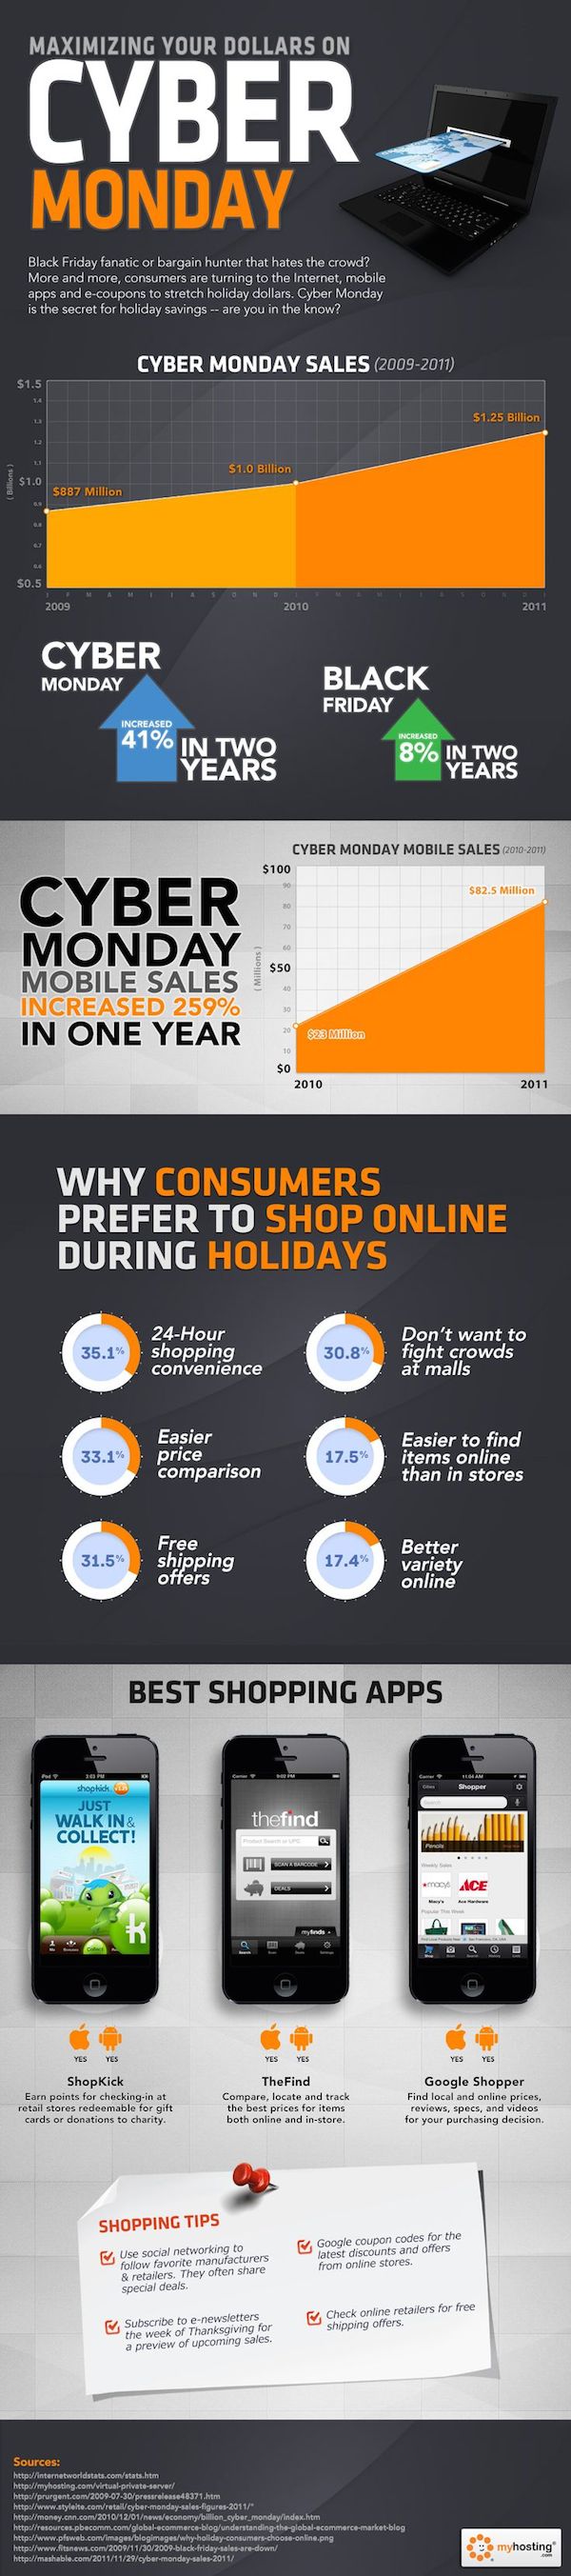 20 Black Friday And Cyber Monday Infographics image 19.jpg